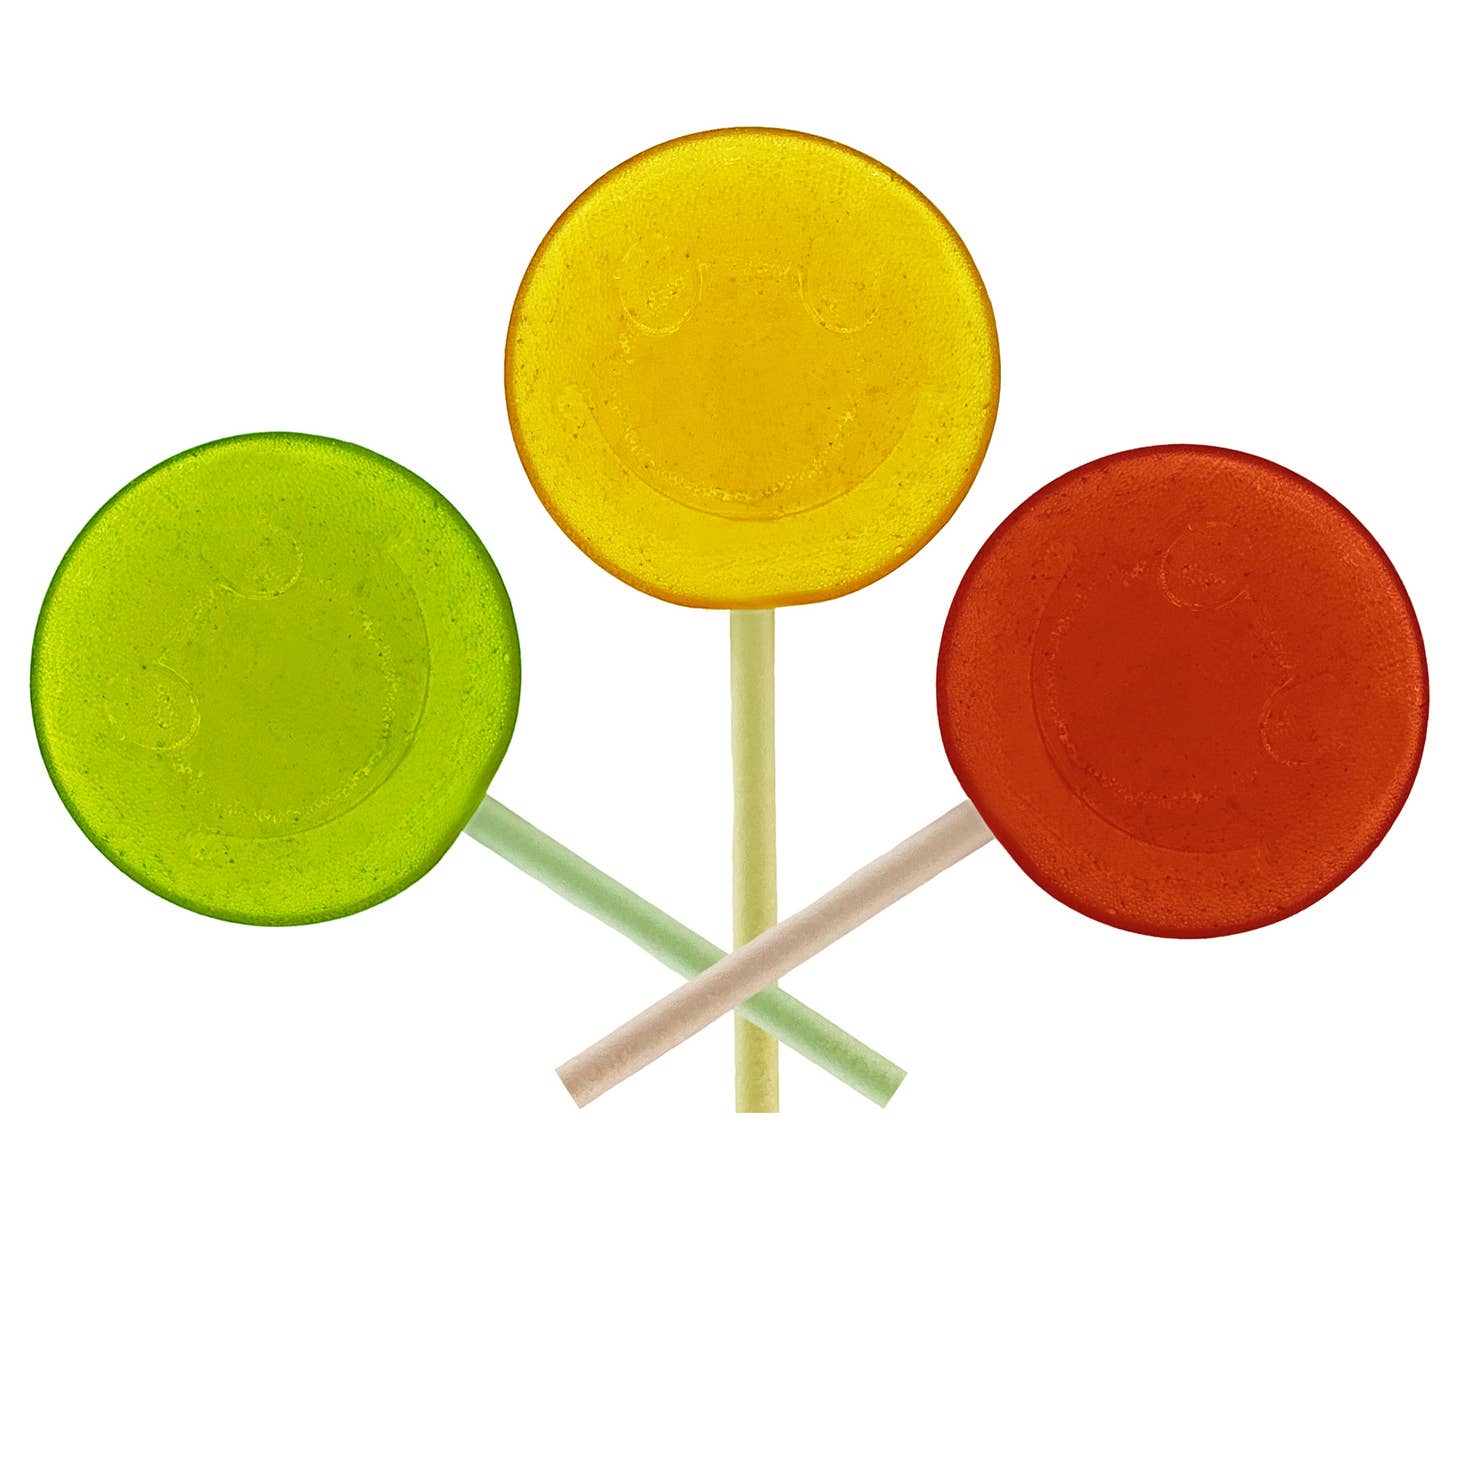 Lolly with citrus flavour